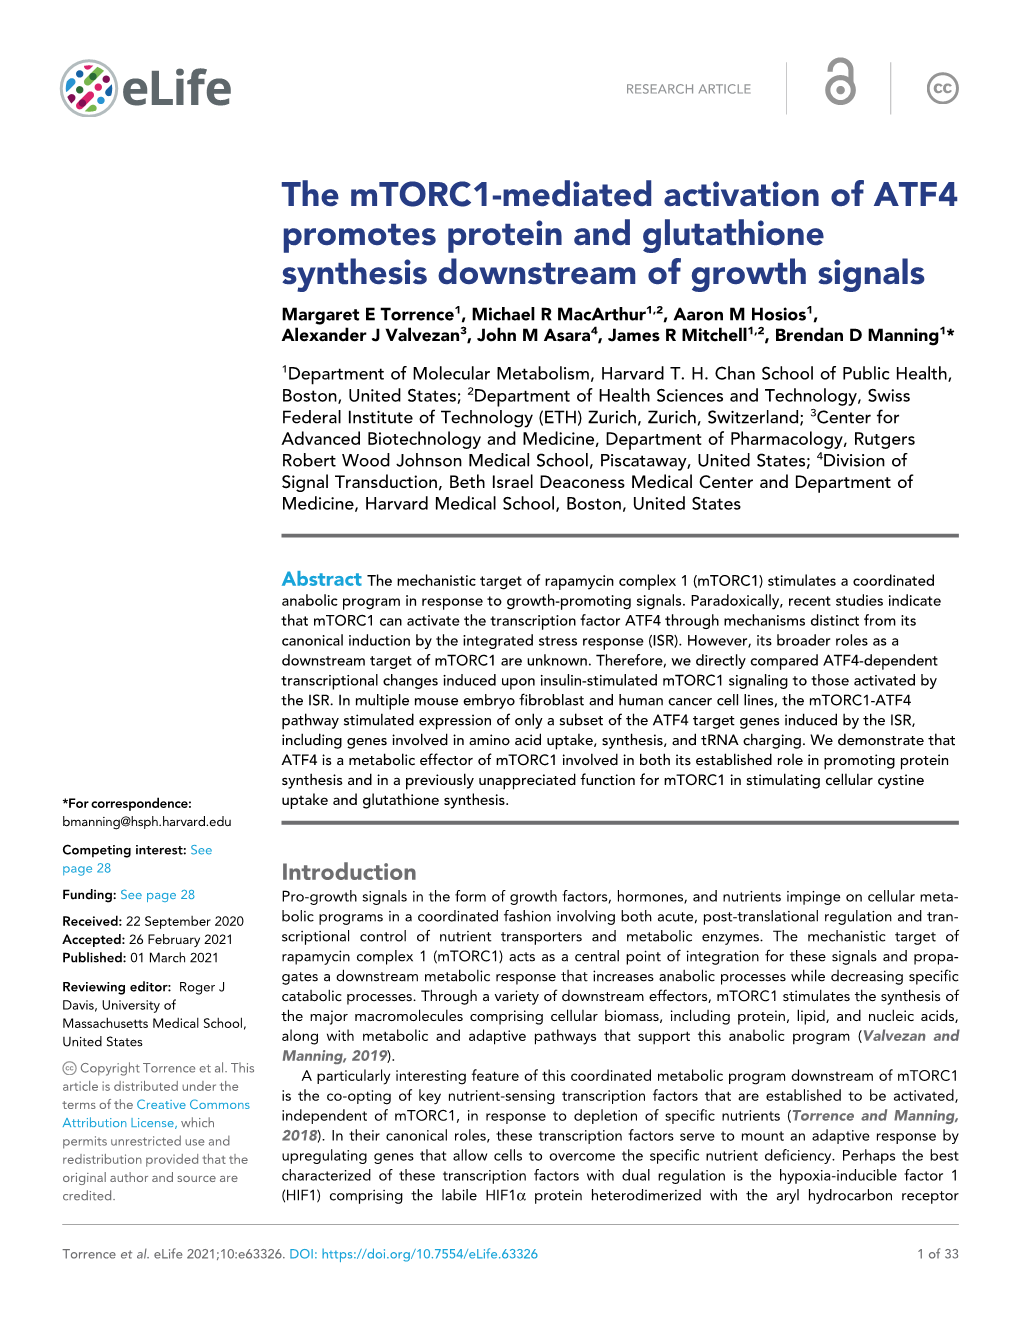 The Mtorc1-Mediated Activation of ATF4 Promotes Protein and Glutathione Synthesis Downstream of Growth Signals